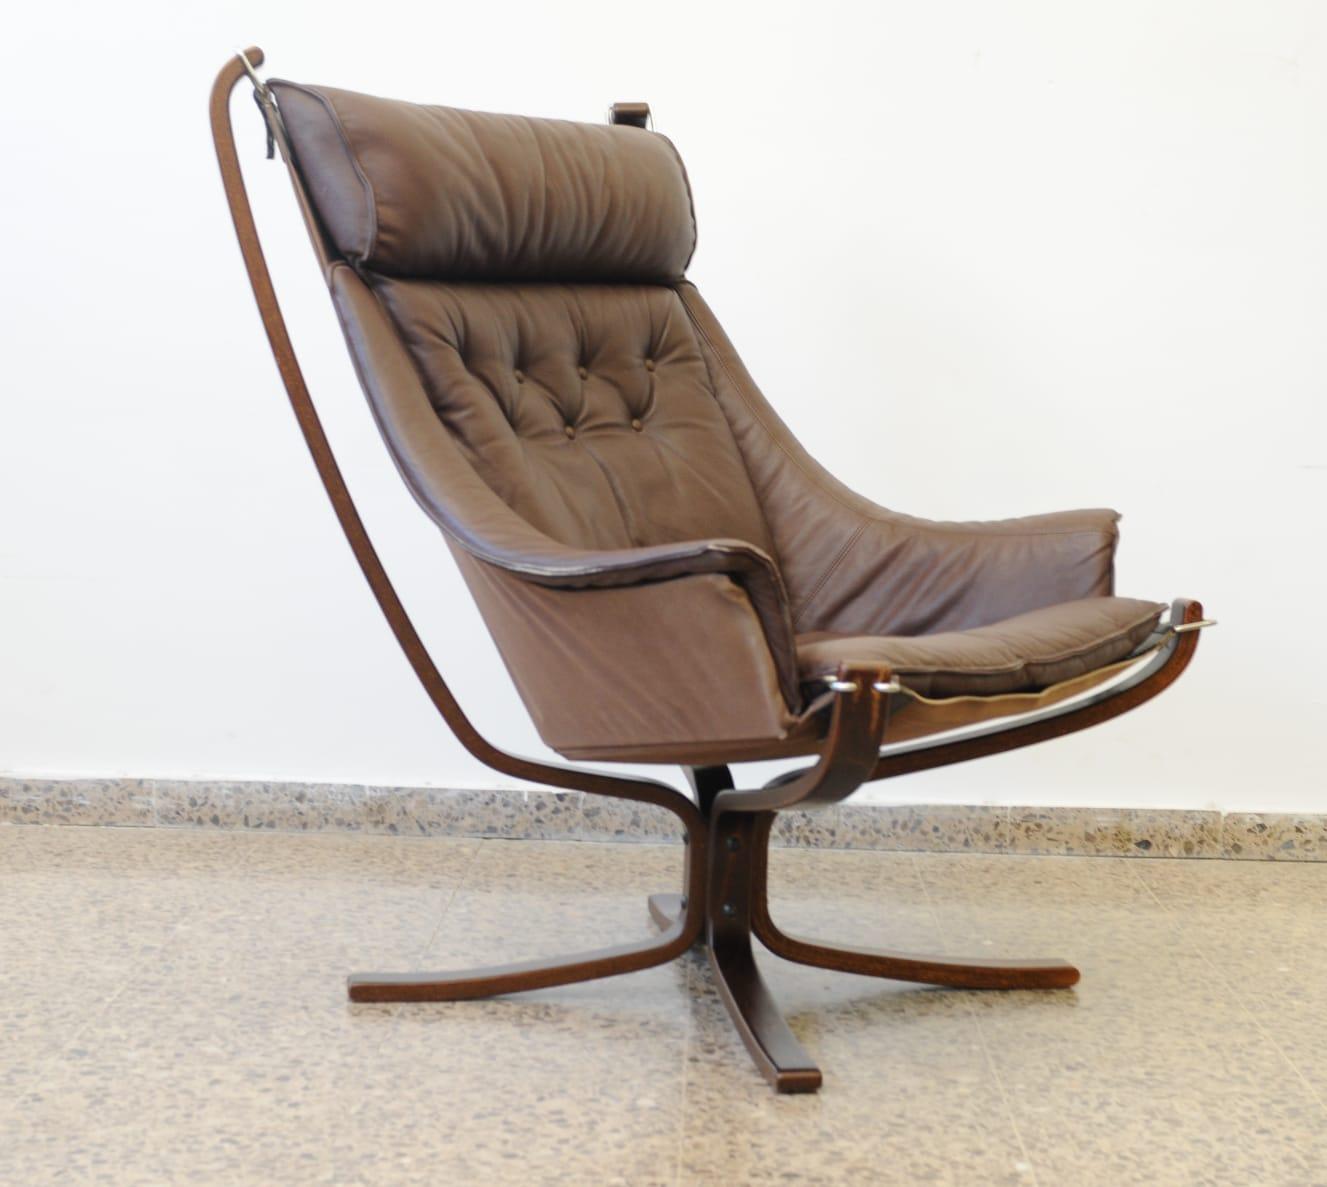 Beautiful Scandinavian designed lounge Falcon chairs by Sigurd Ressell circa early to mid 1970s
